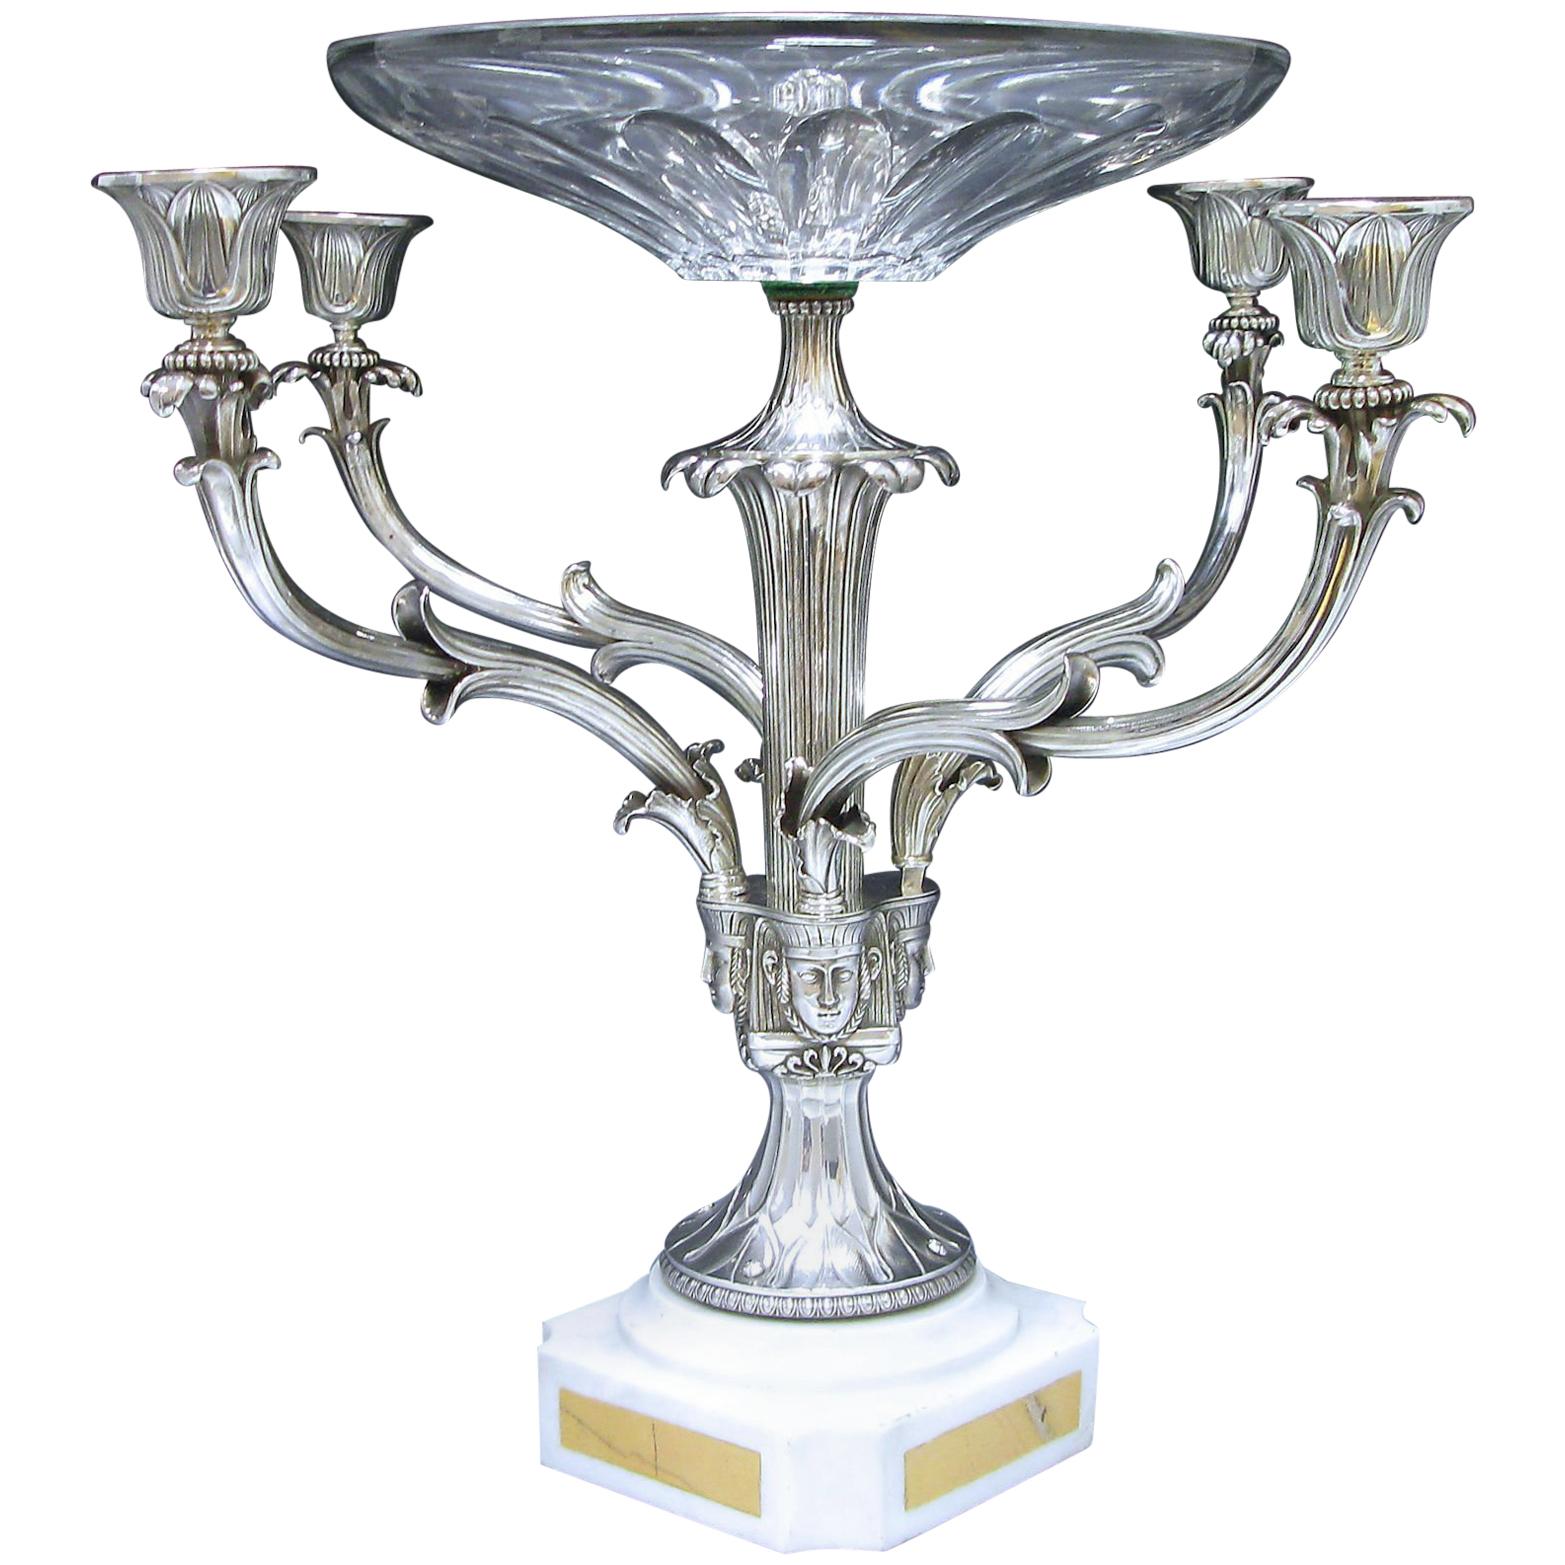 George IV Antique Silver Epergne Centerpiece For Sale